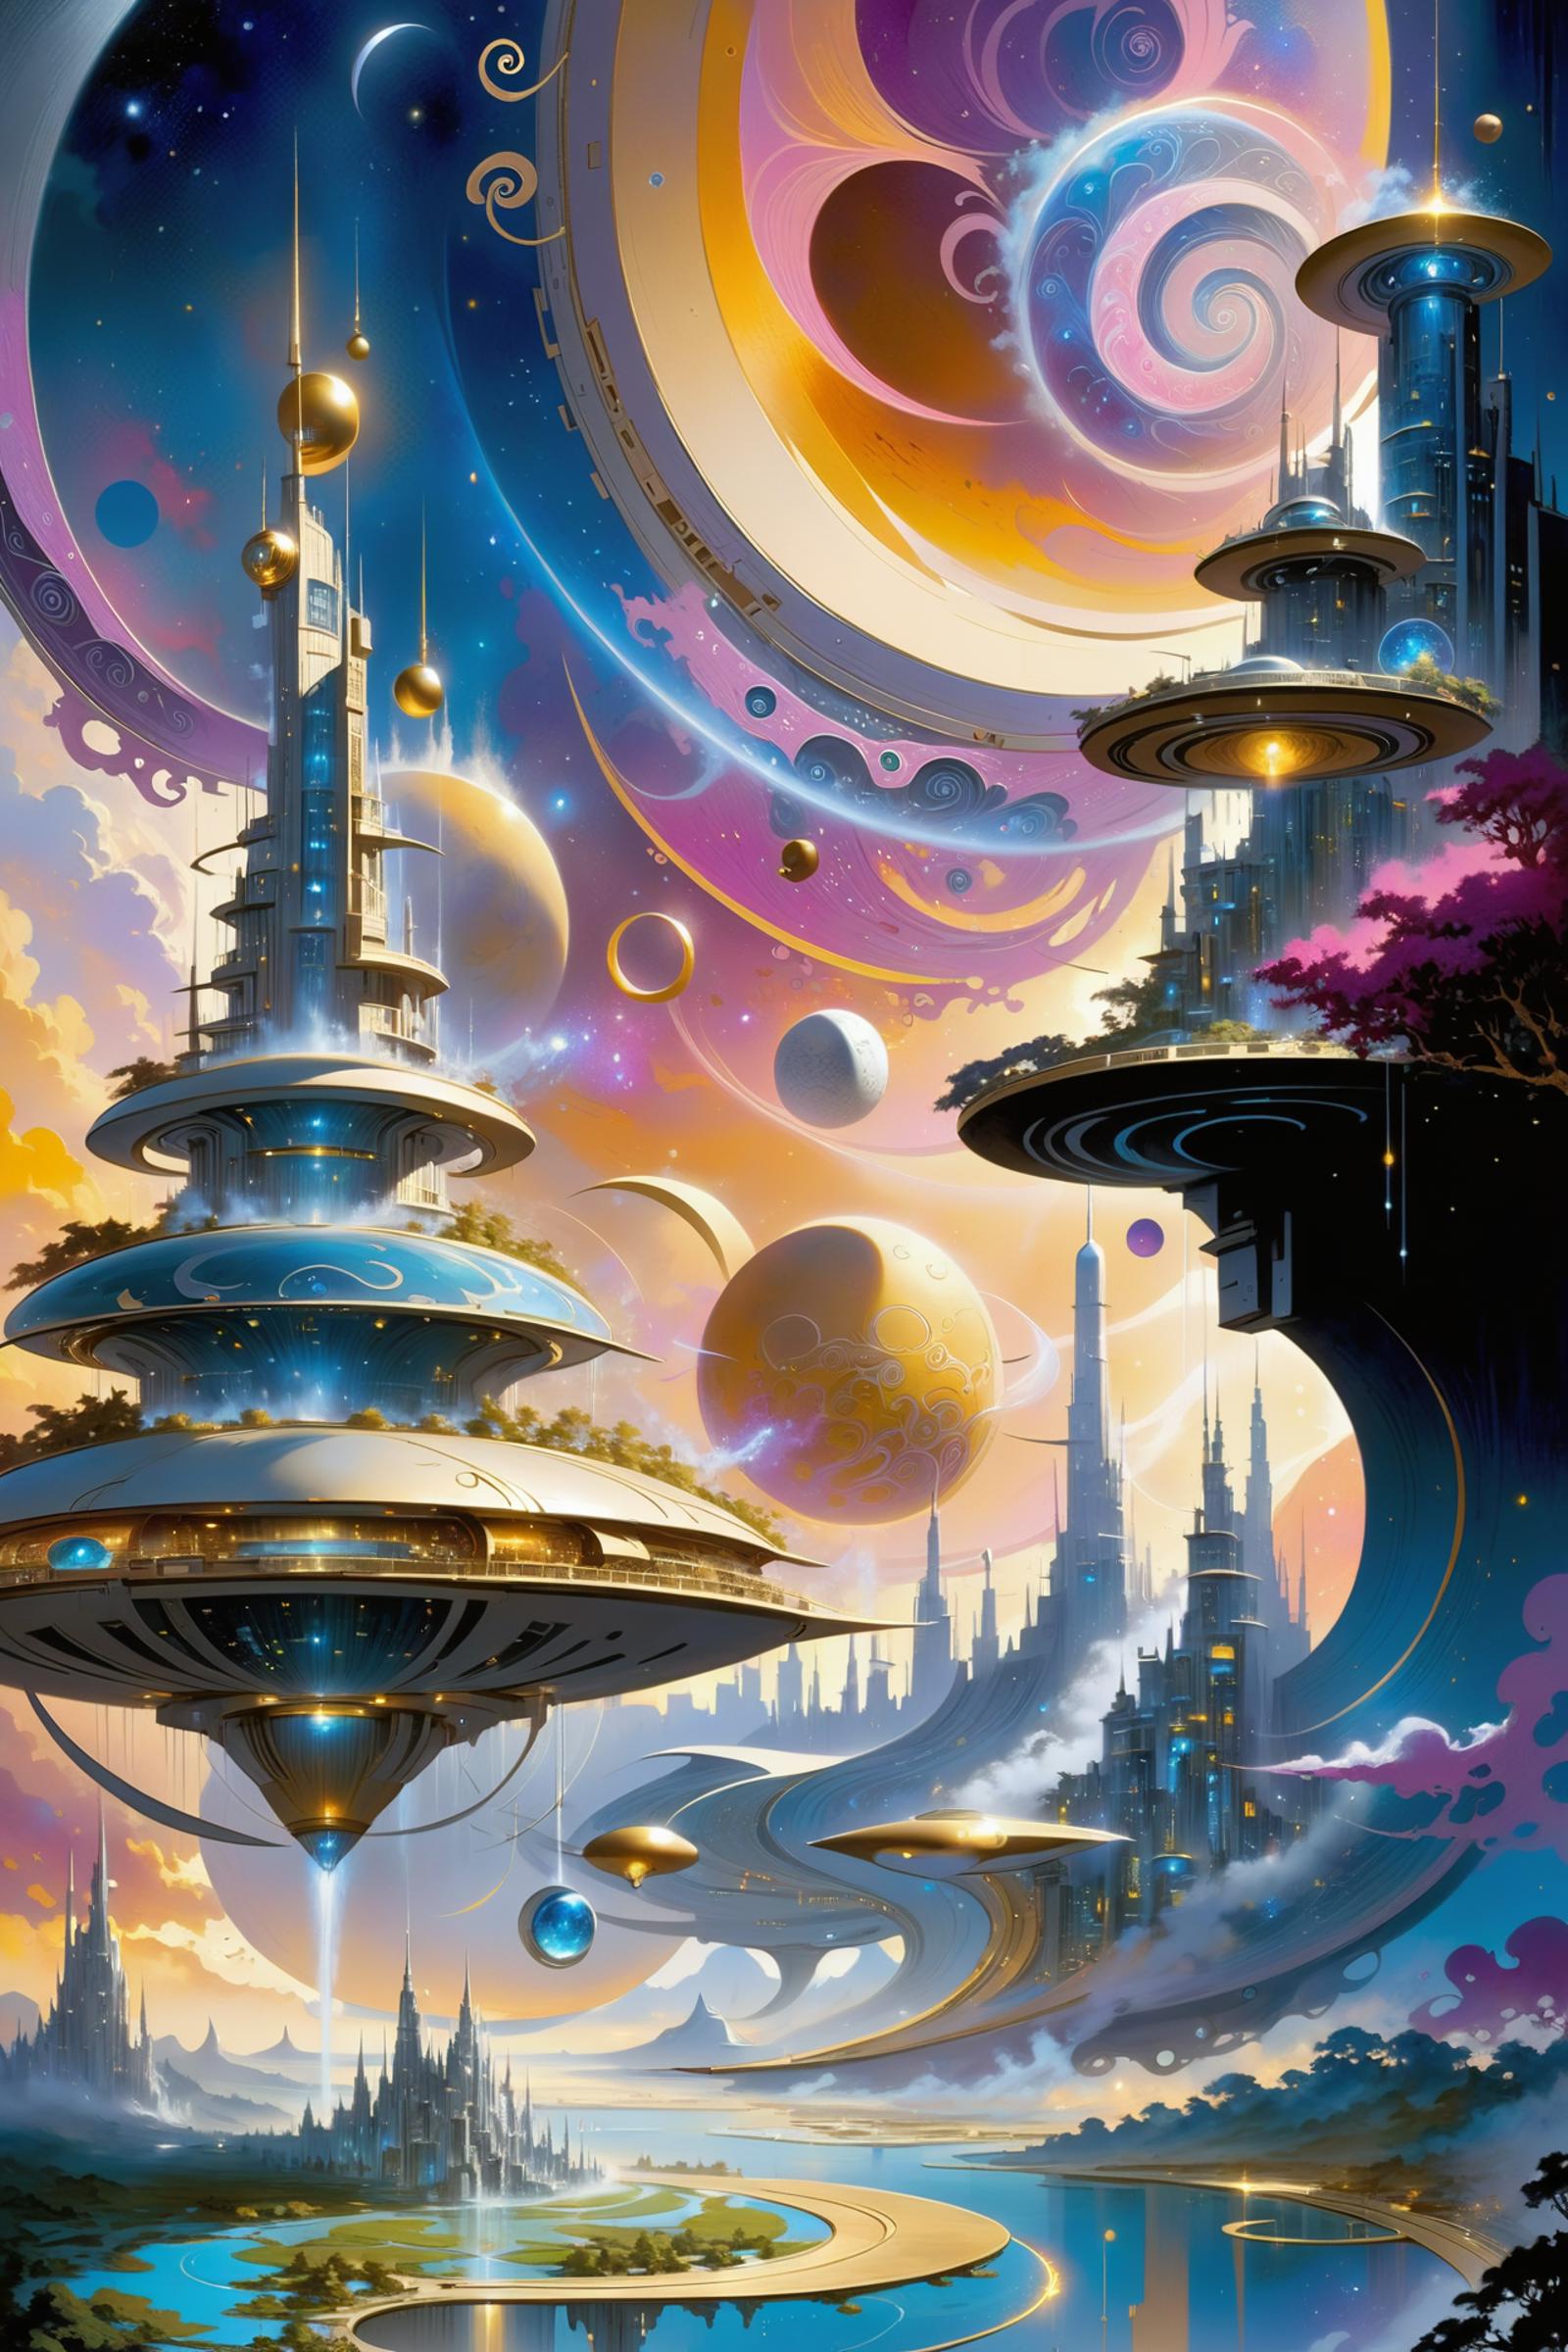 A colorful painting of various spaceships and planets.